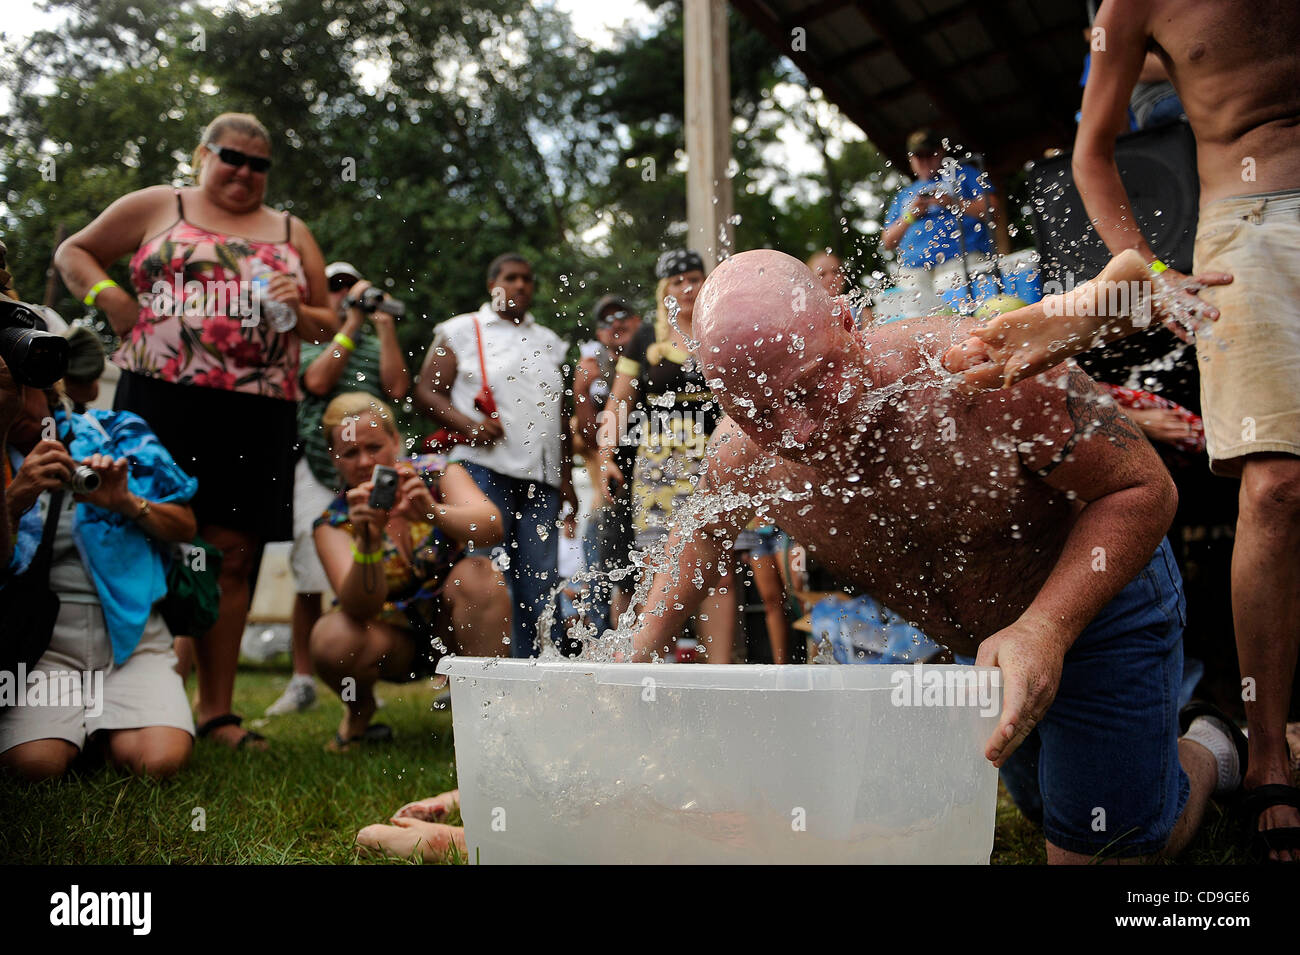 SATURDAY JULY 10, 2010 EAST DUBLIN, GEORGIA - A Redneck Games throws a pig's foot with his mouth during the bobbing for pigs feet contest at Buckeye Park during the Redneck Games in East Dublin, Georgia. The games started in 1996 as spoof on the Olympics which were being held in Atlanta, Georgia at  Stock Photo